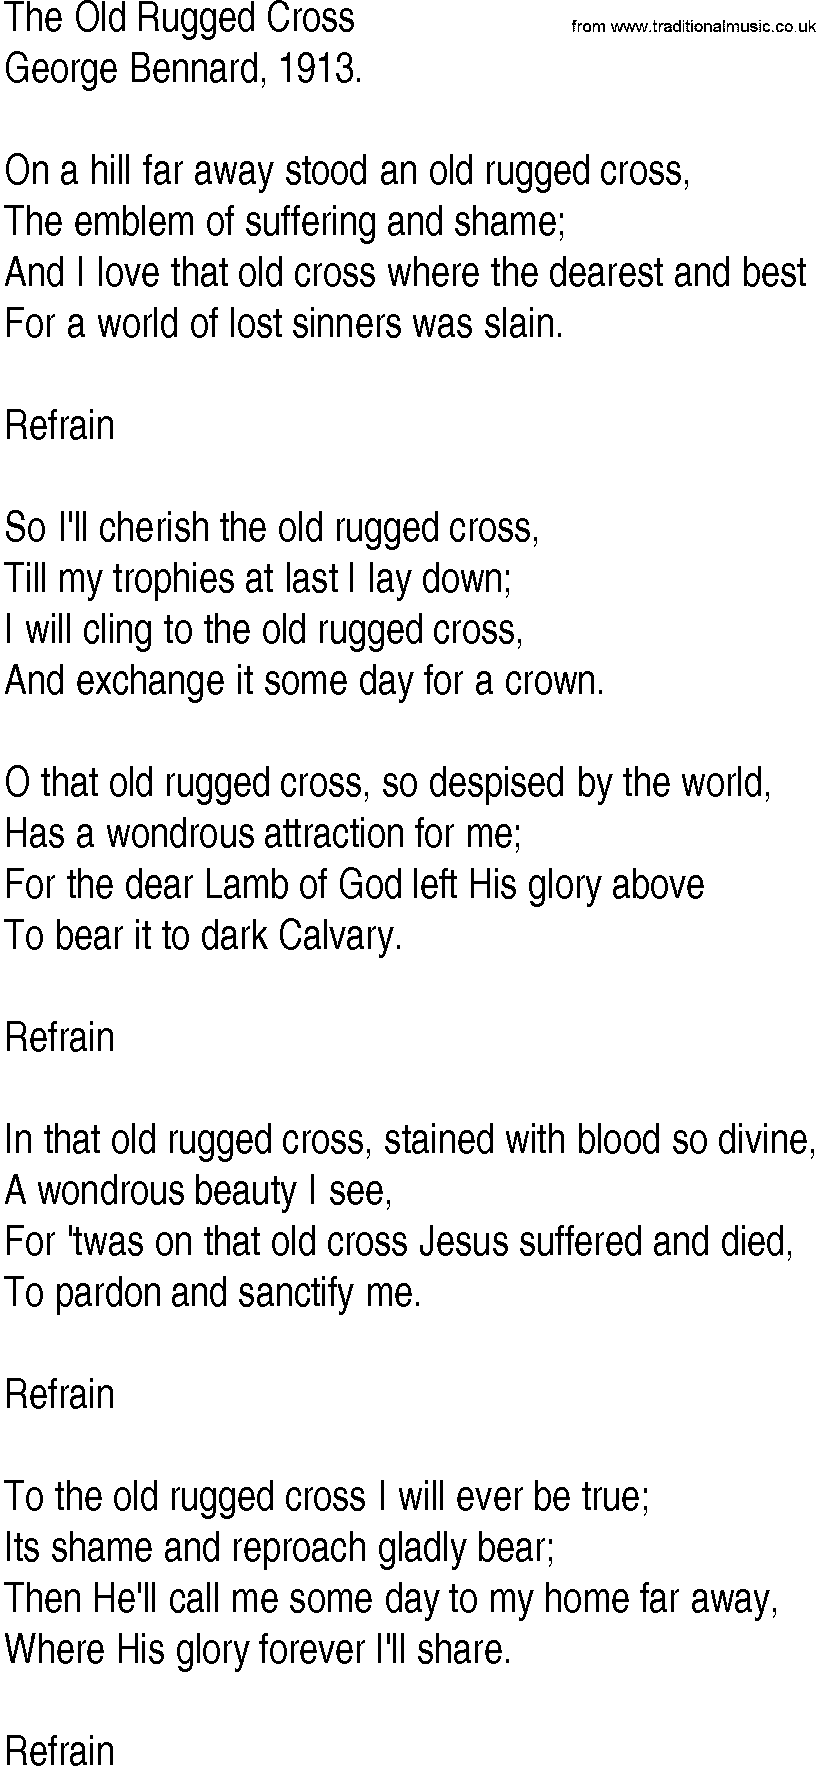 Hymn and Gospel Song Lyrics for The Old Rugged Cross by Bennard